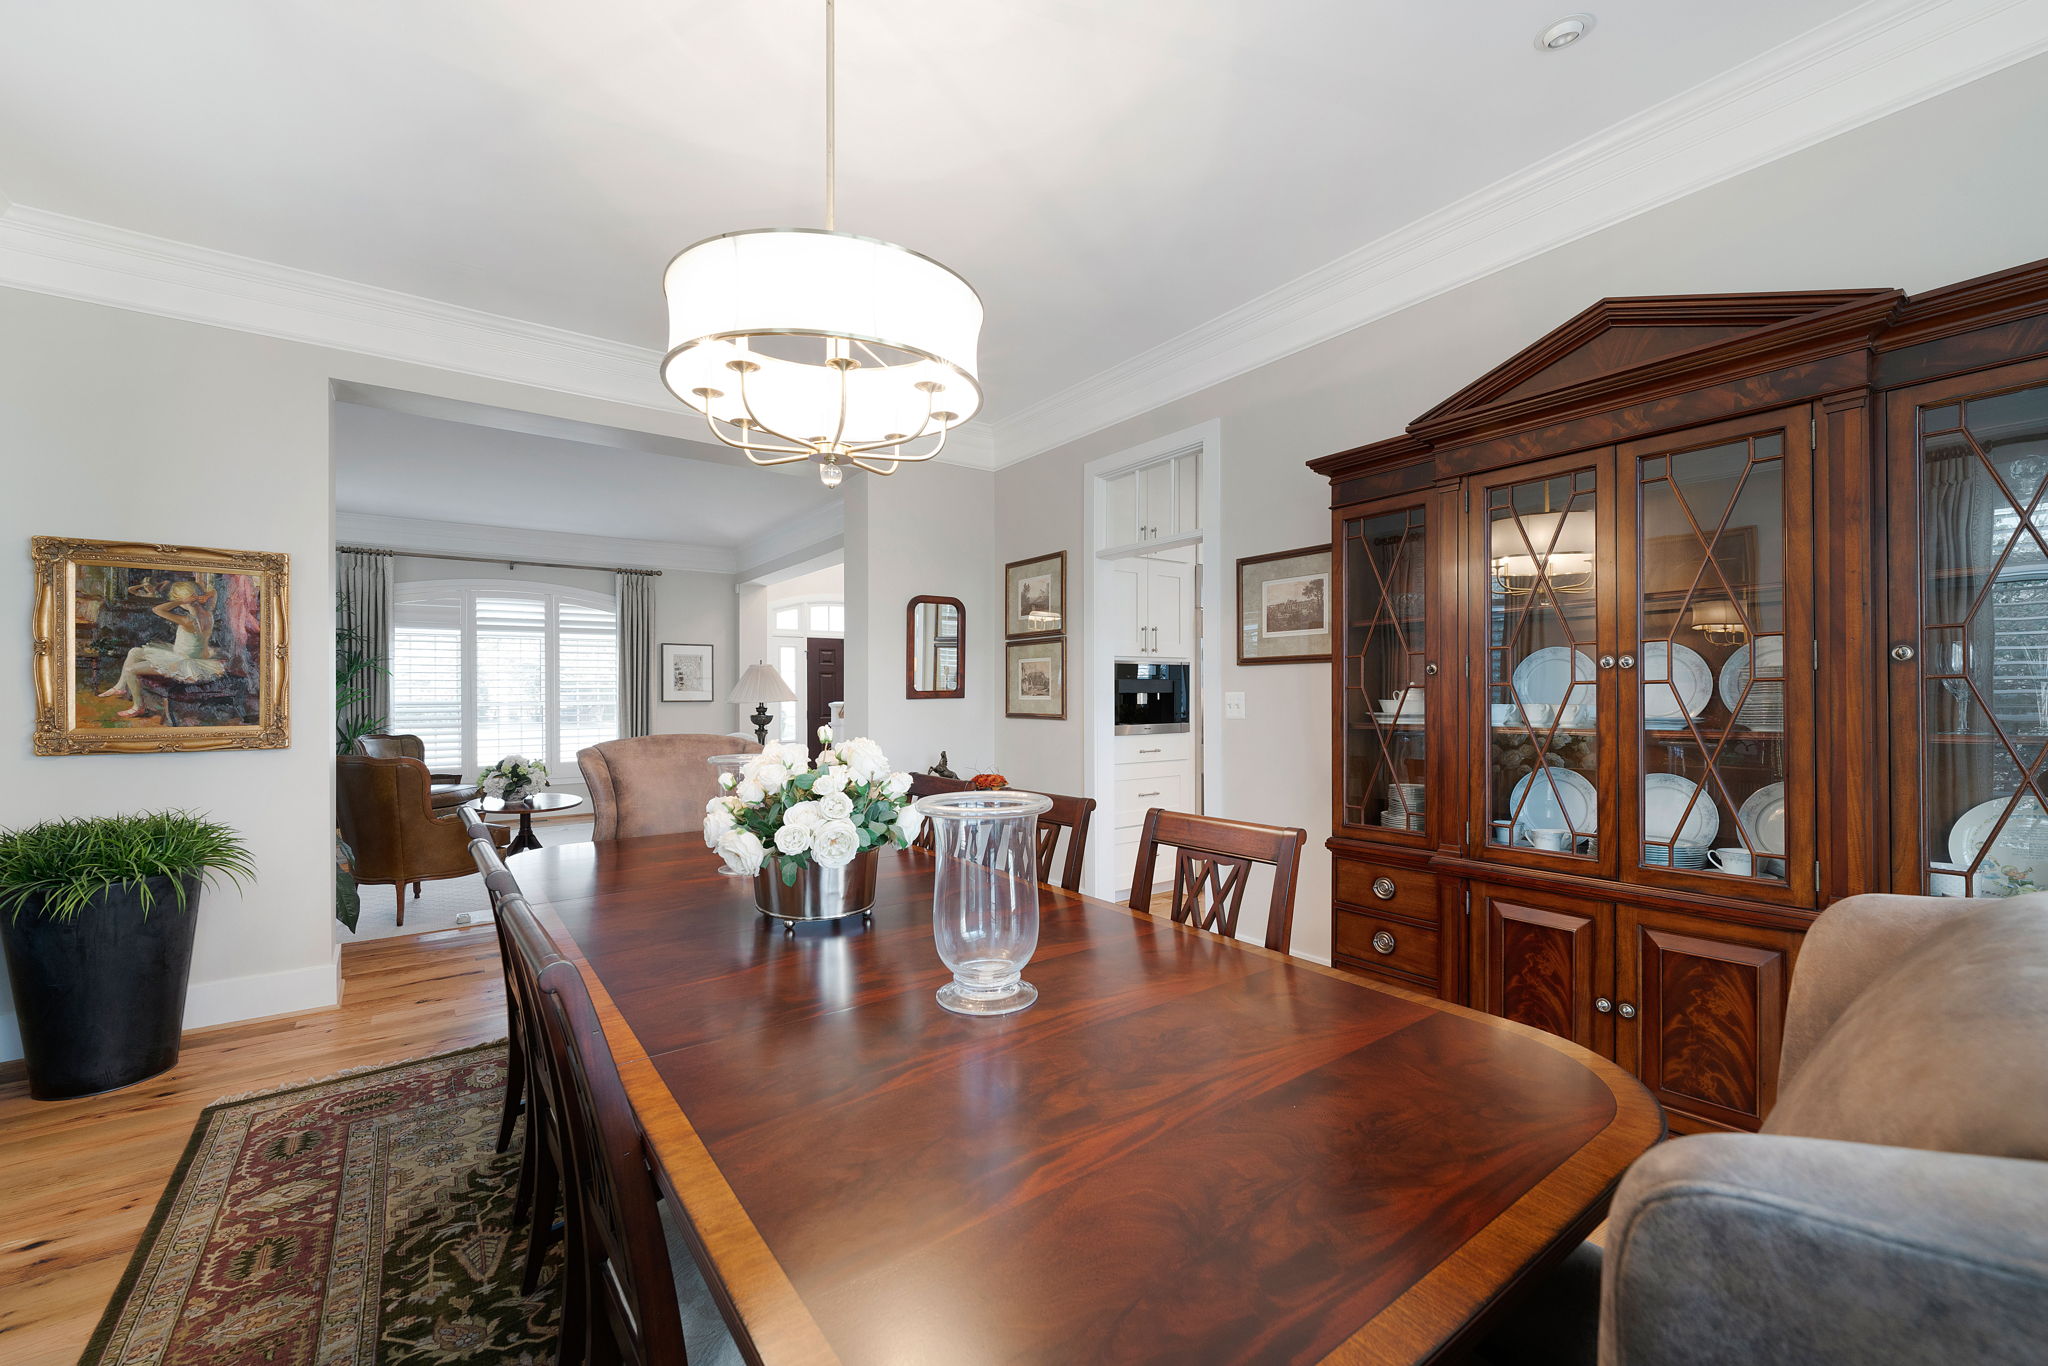 This dining room is spacious and gracious